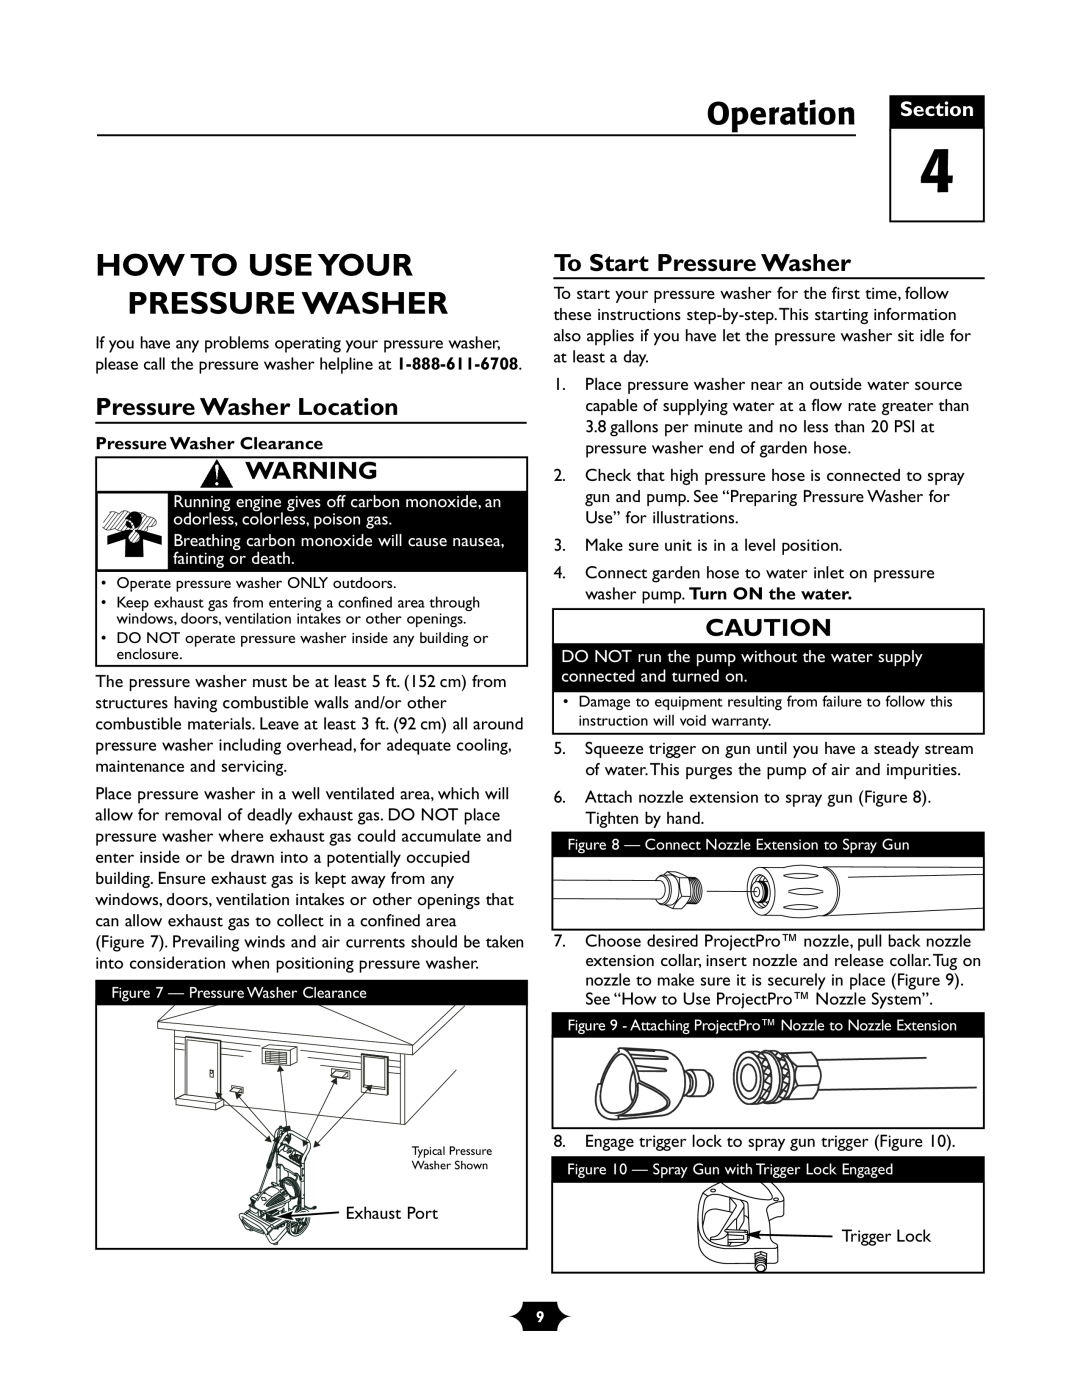 Troy-Bilt 020242-1 Operation Section, How To Use Your Pressure Washer, Pressure Washer Location, To Start Pressure Washer 